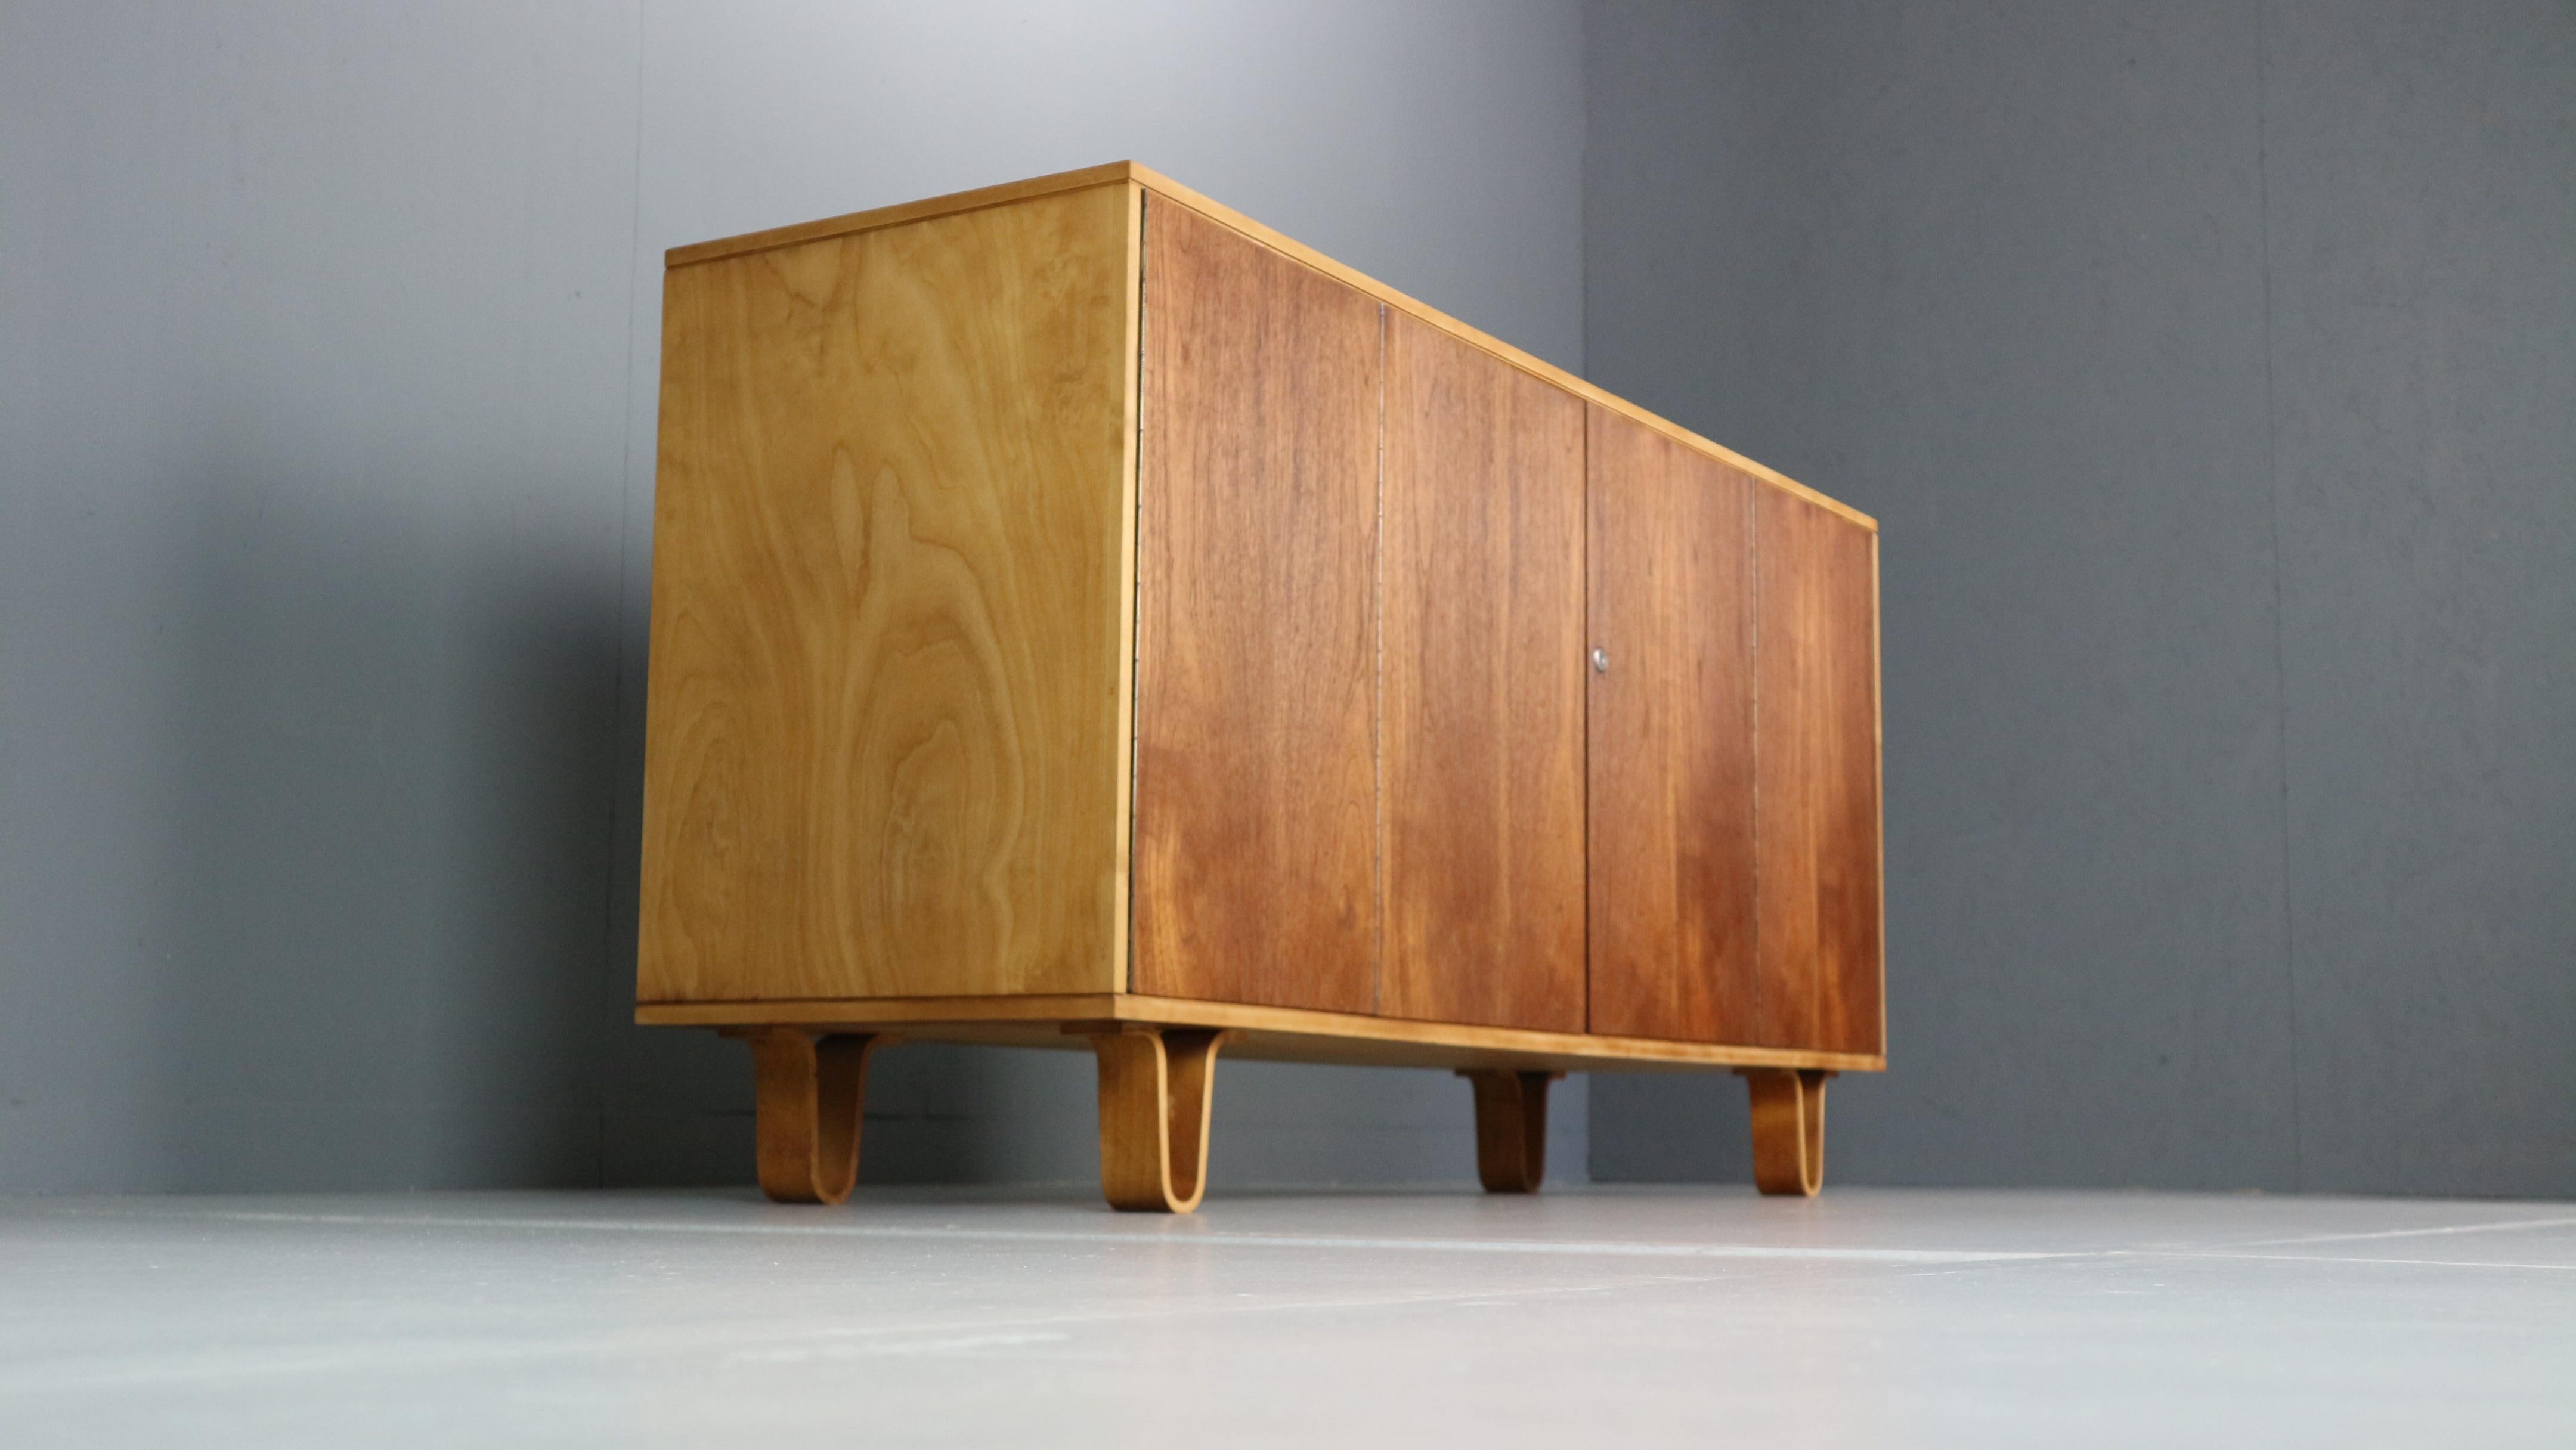 20th Century Pastoe sideboard DB02 by Cees Braakman 1952 Birch and Teak Wood For Sale